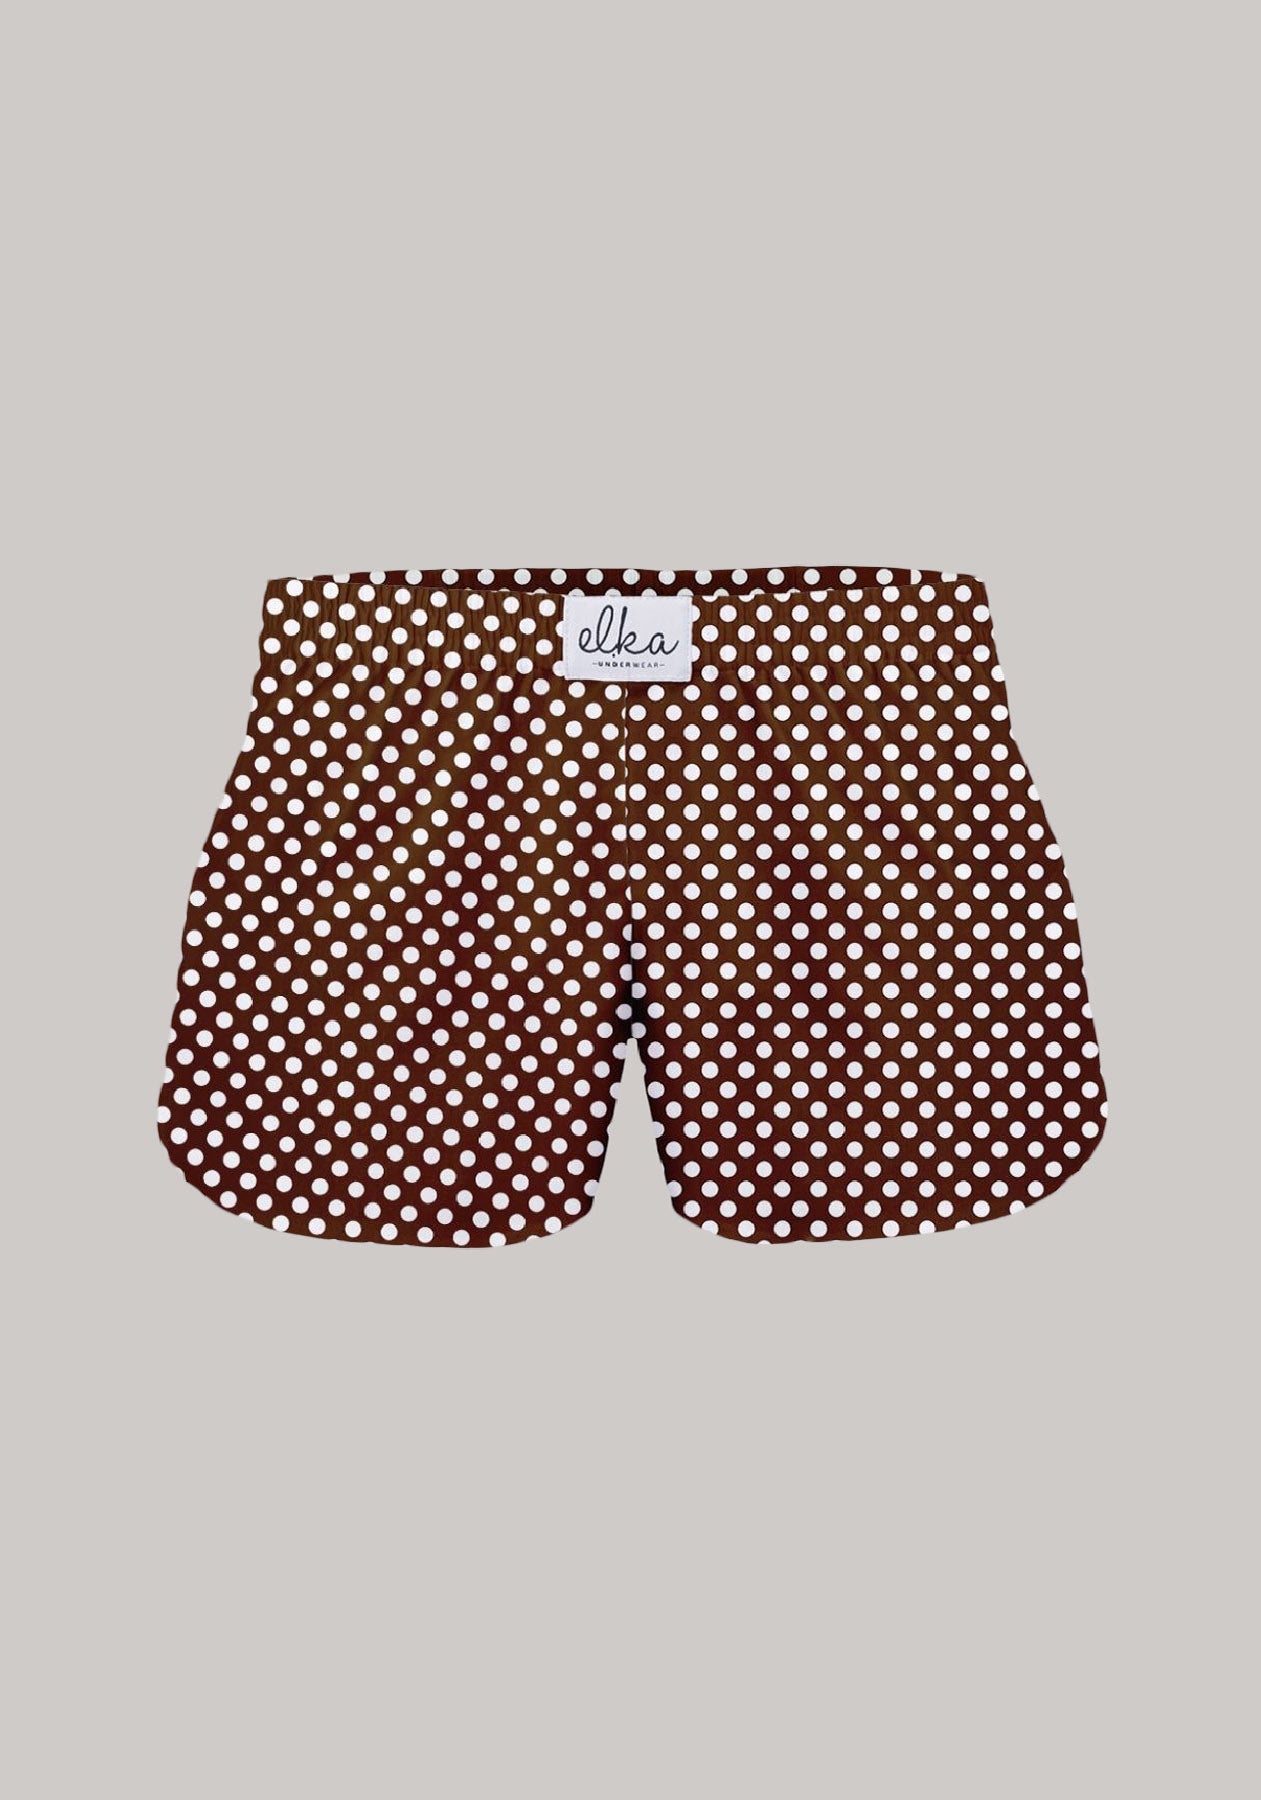 Women's shorts Brown with polka dots